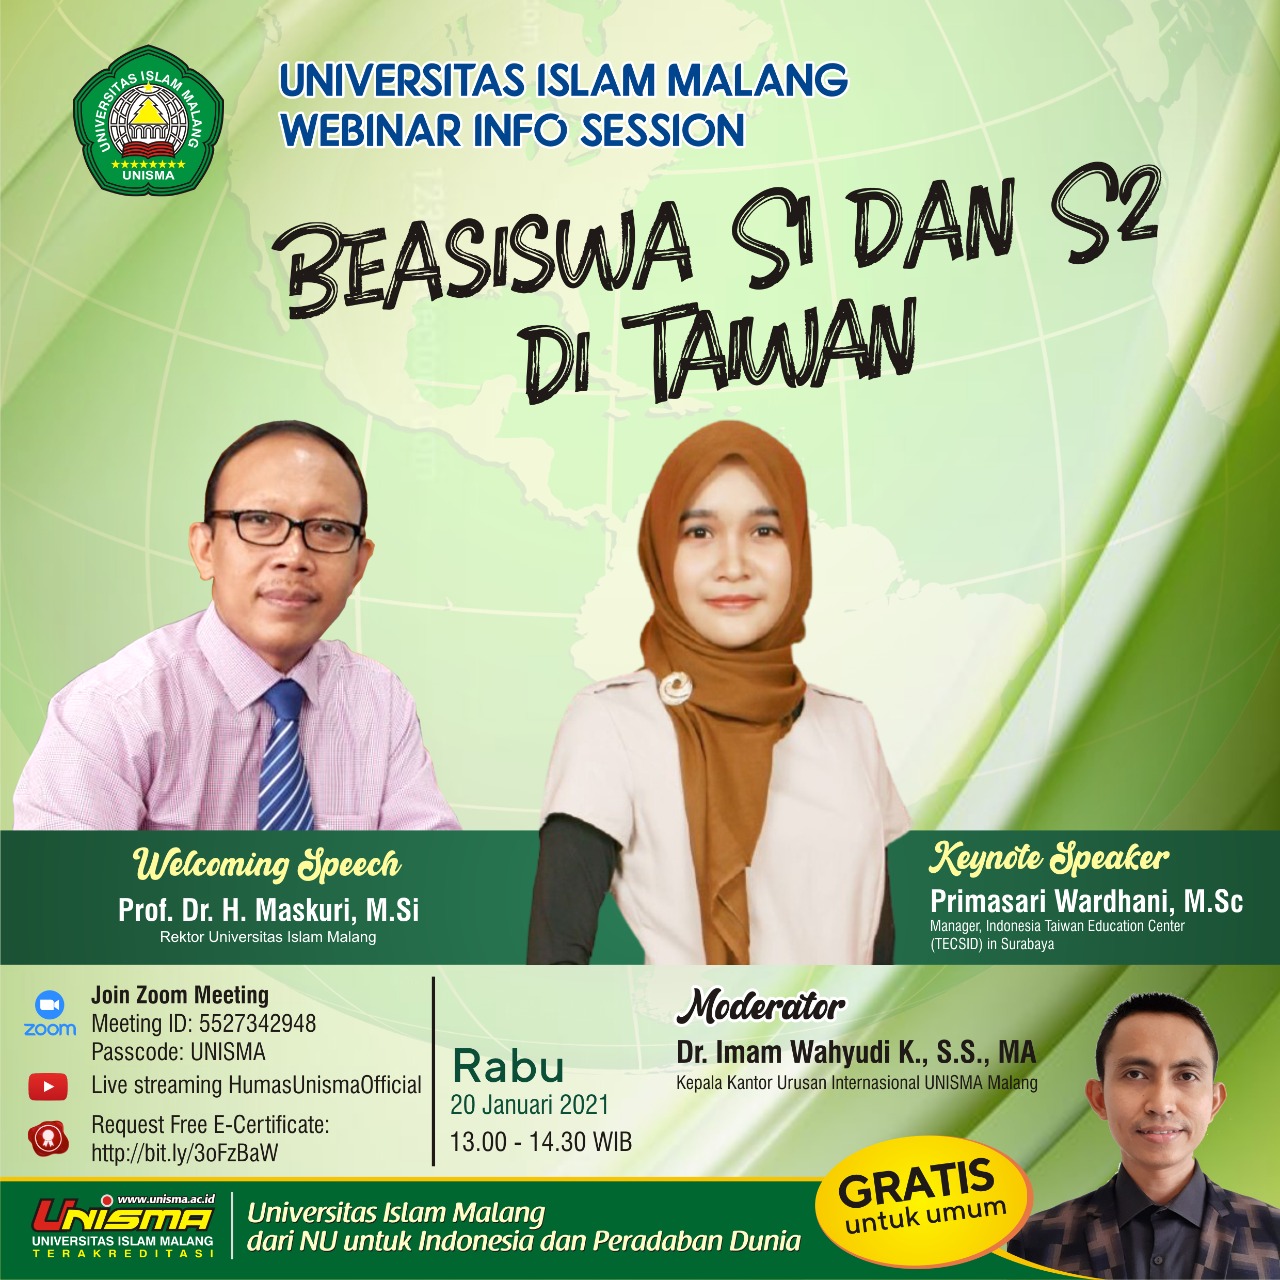 Scholarship Webinar in Taiwan for S1-S2 at the Islamic University of Malang